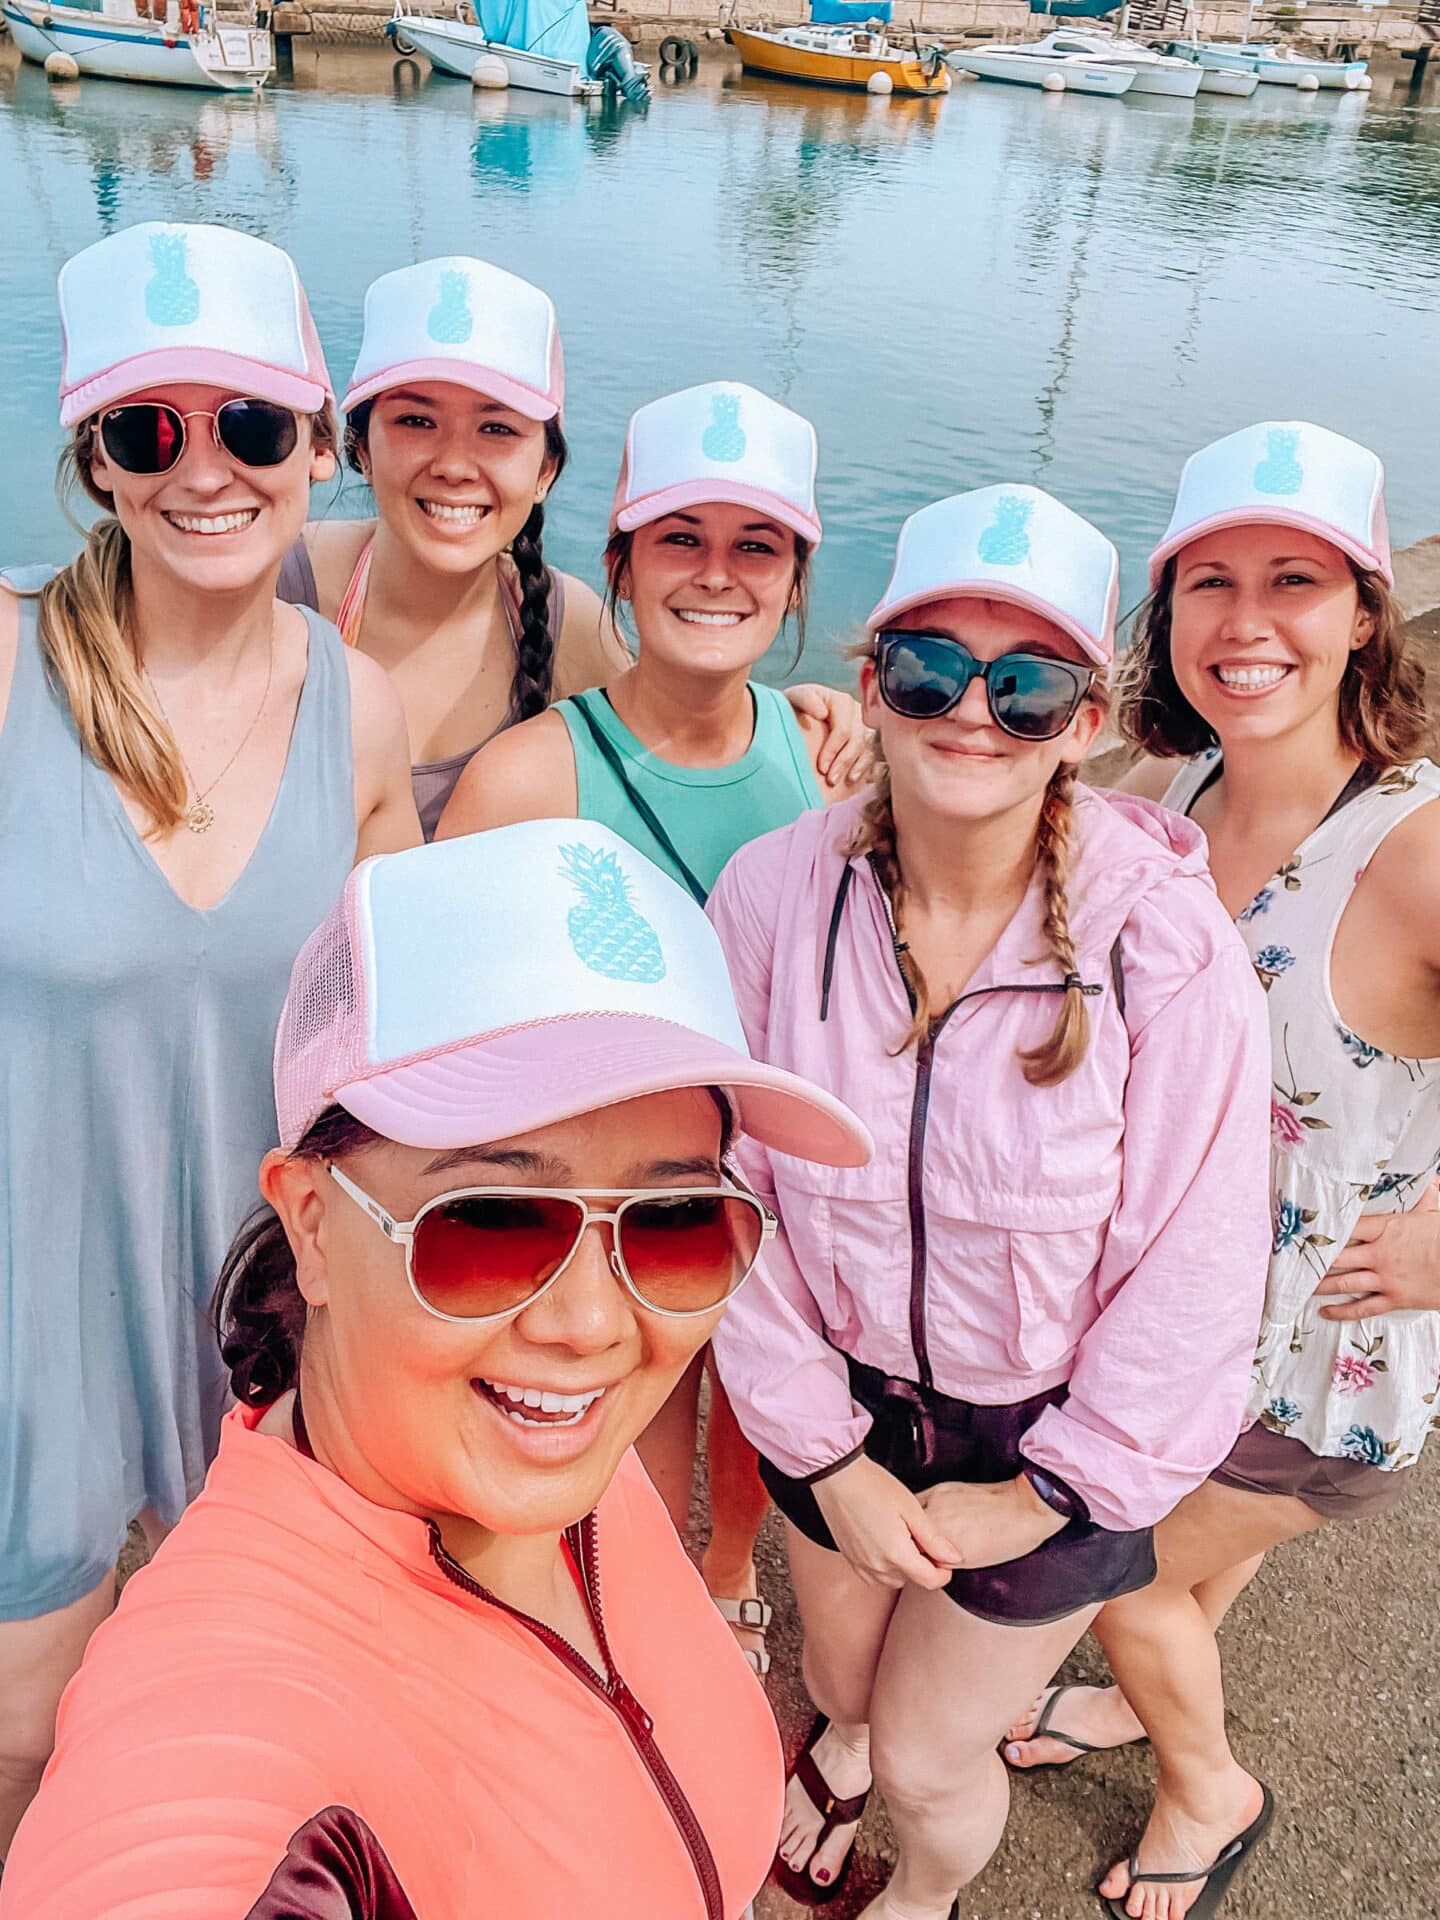 Cute bachelorette party Instagram captions, by wedding blogger What The Fab